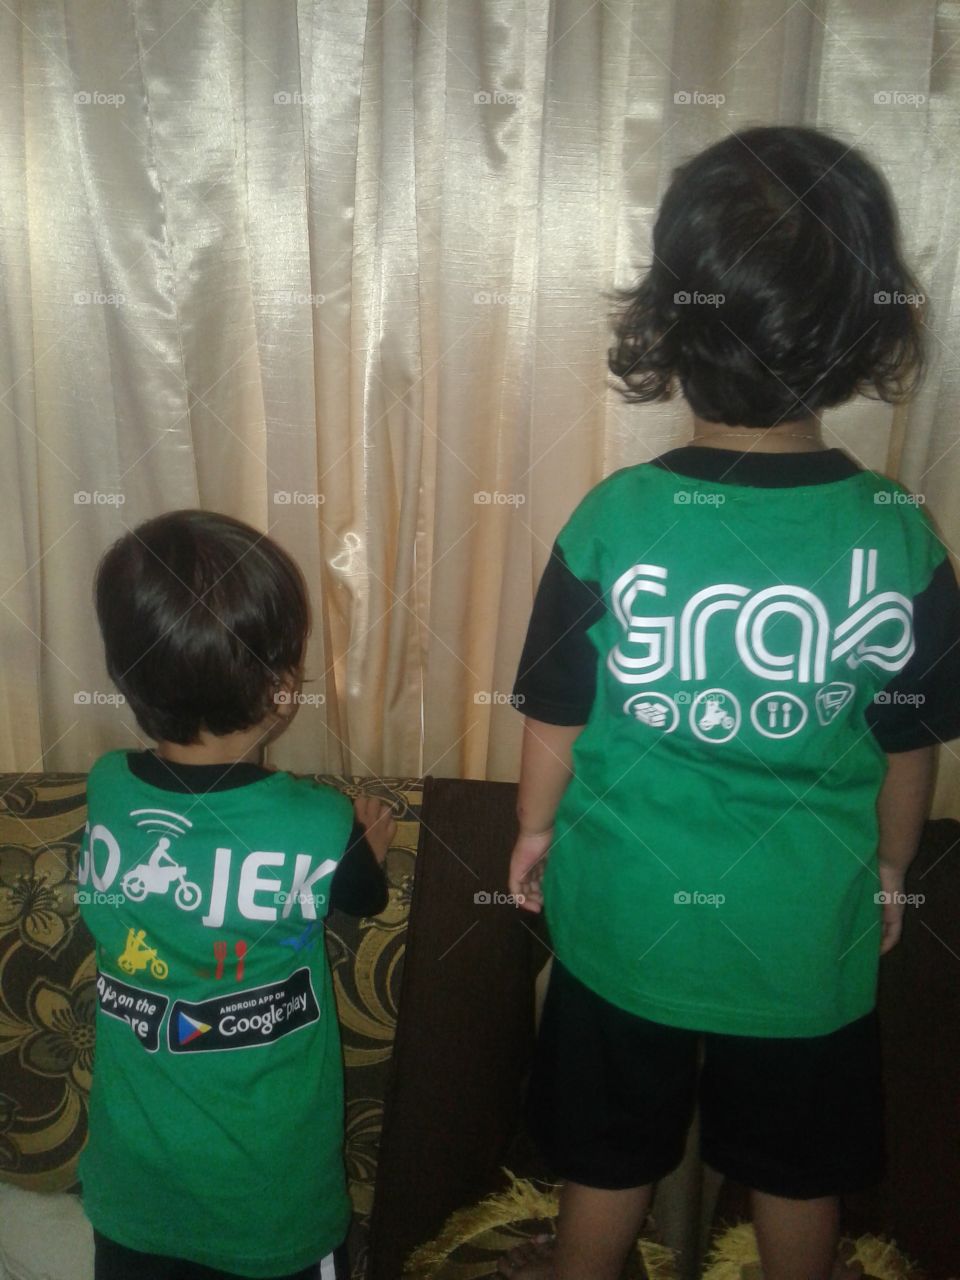 Clothes of Gojek and Grab